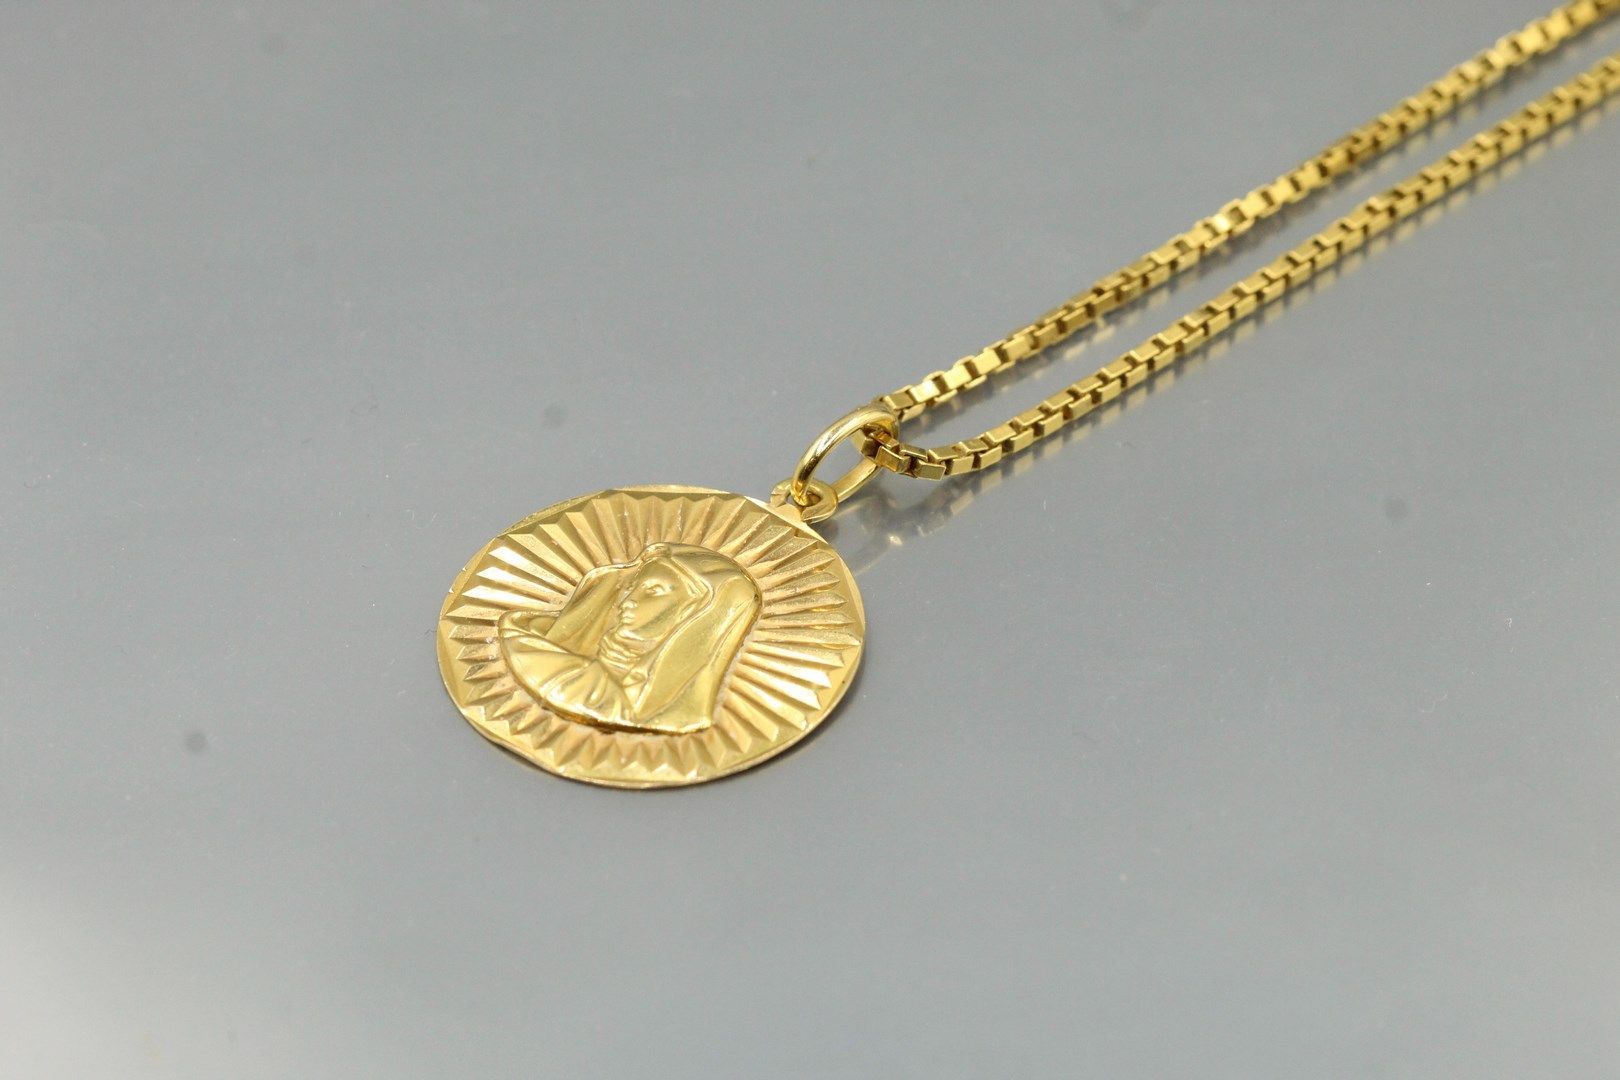 Null 18k (750) yellow gold christening chain and pendant.

Gross weight: 18.98 g&hellip;